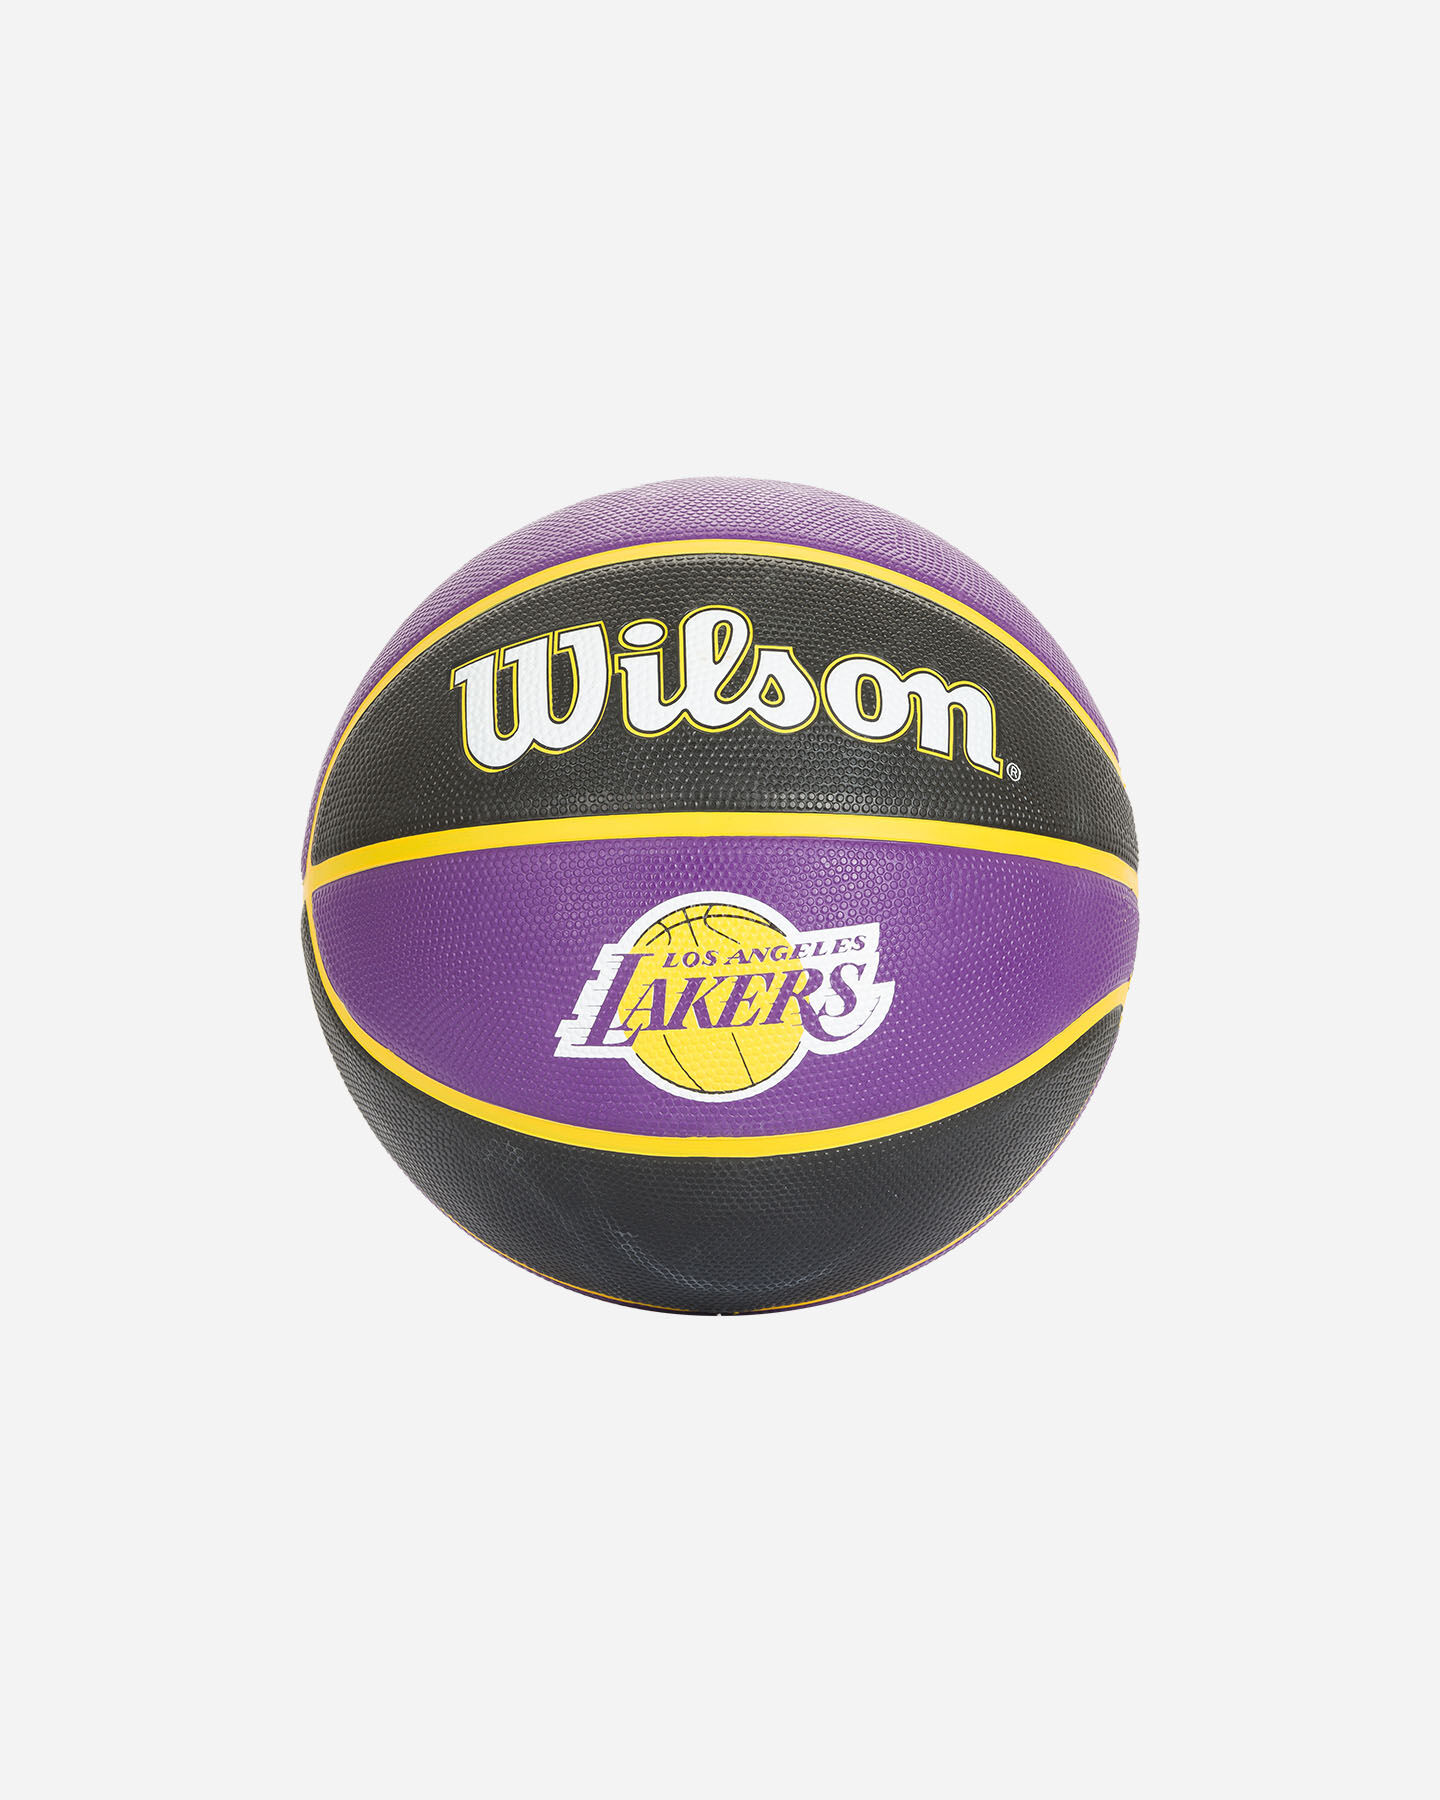  Pallone basket WILSON NBA TRIBUTE TEAM LOS ANGELES LAKERS  S5331470|UNI|OFFICIAL scatto 0